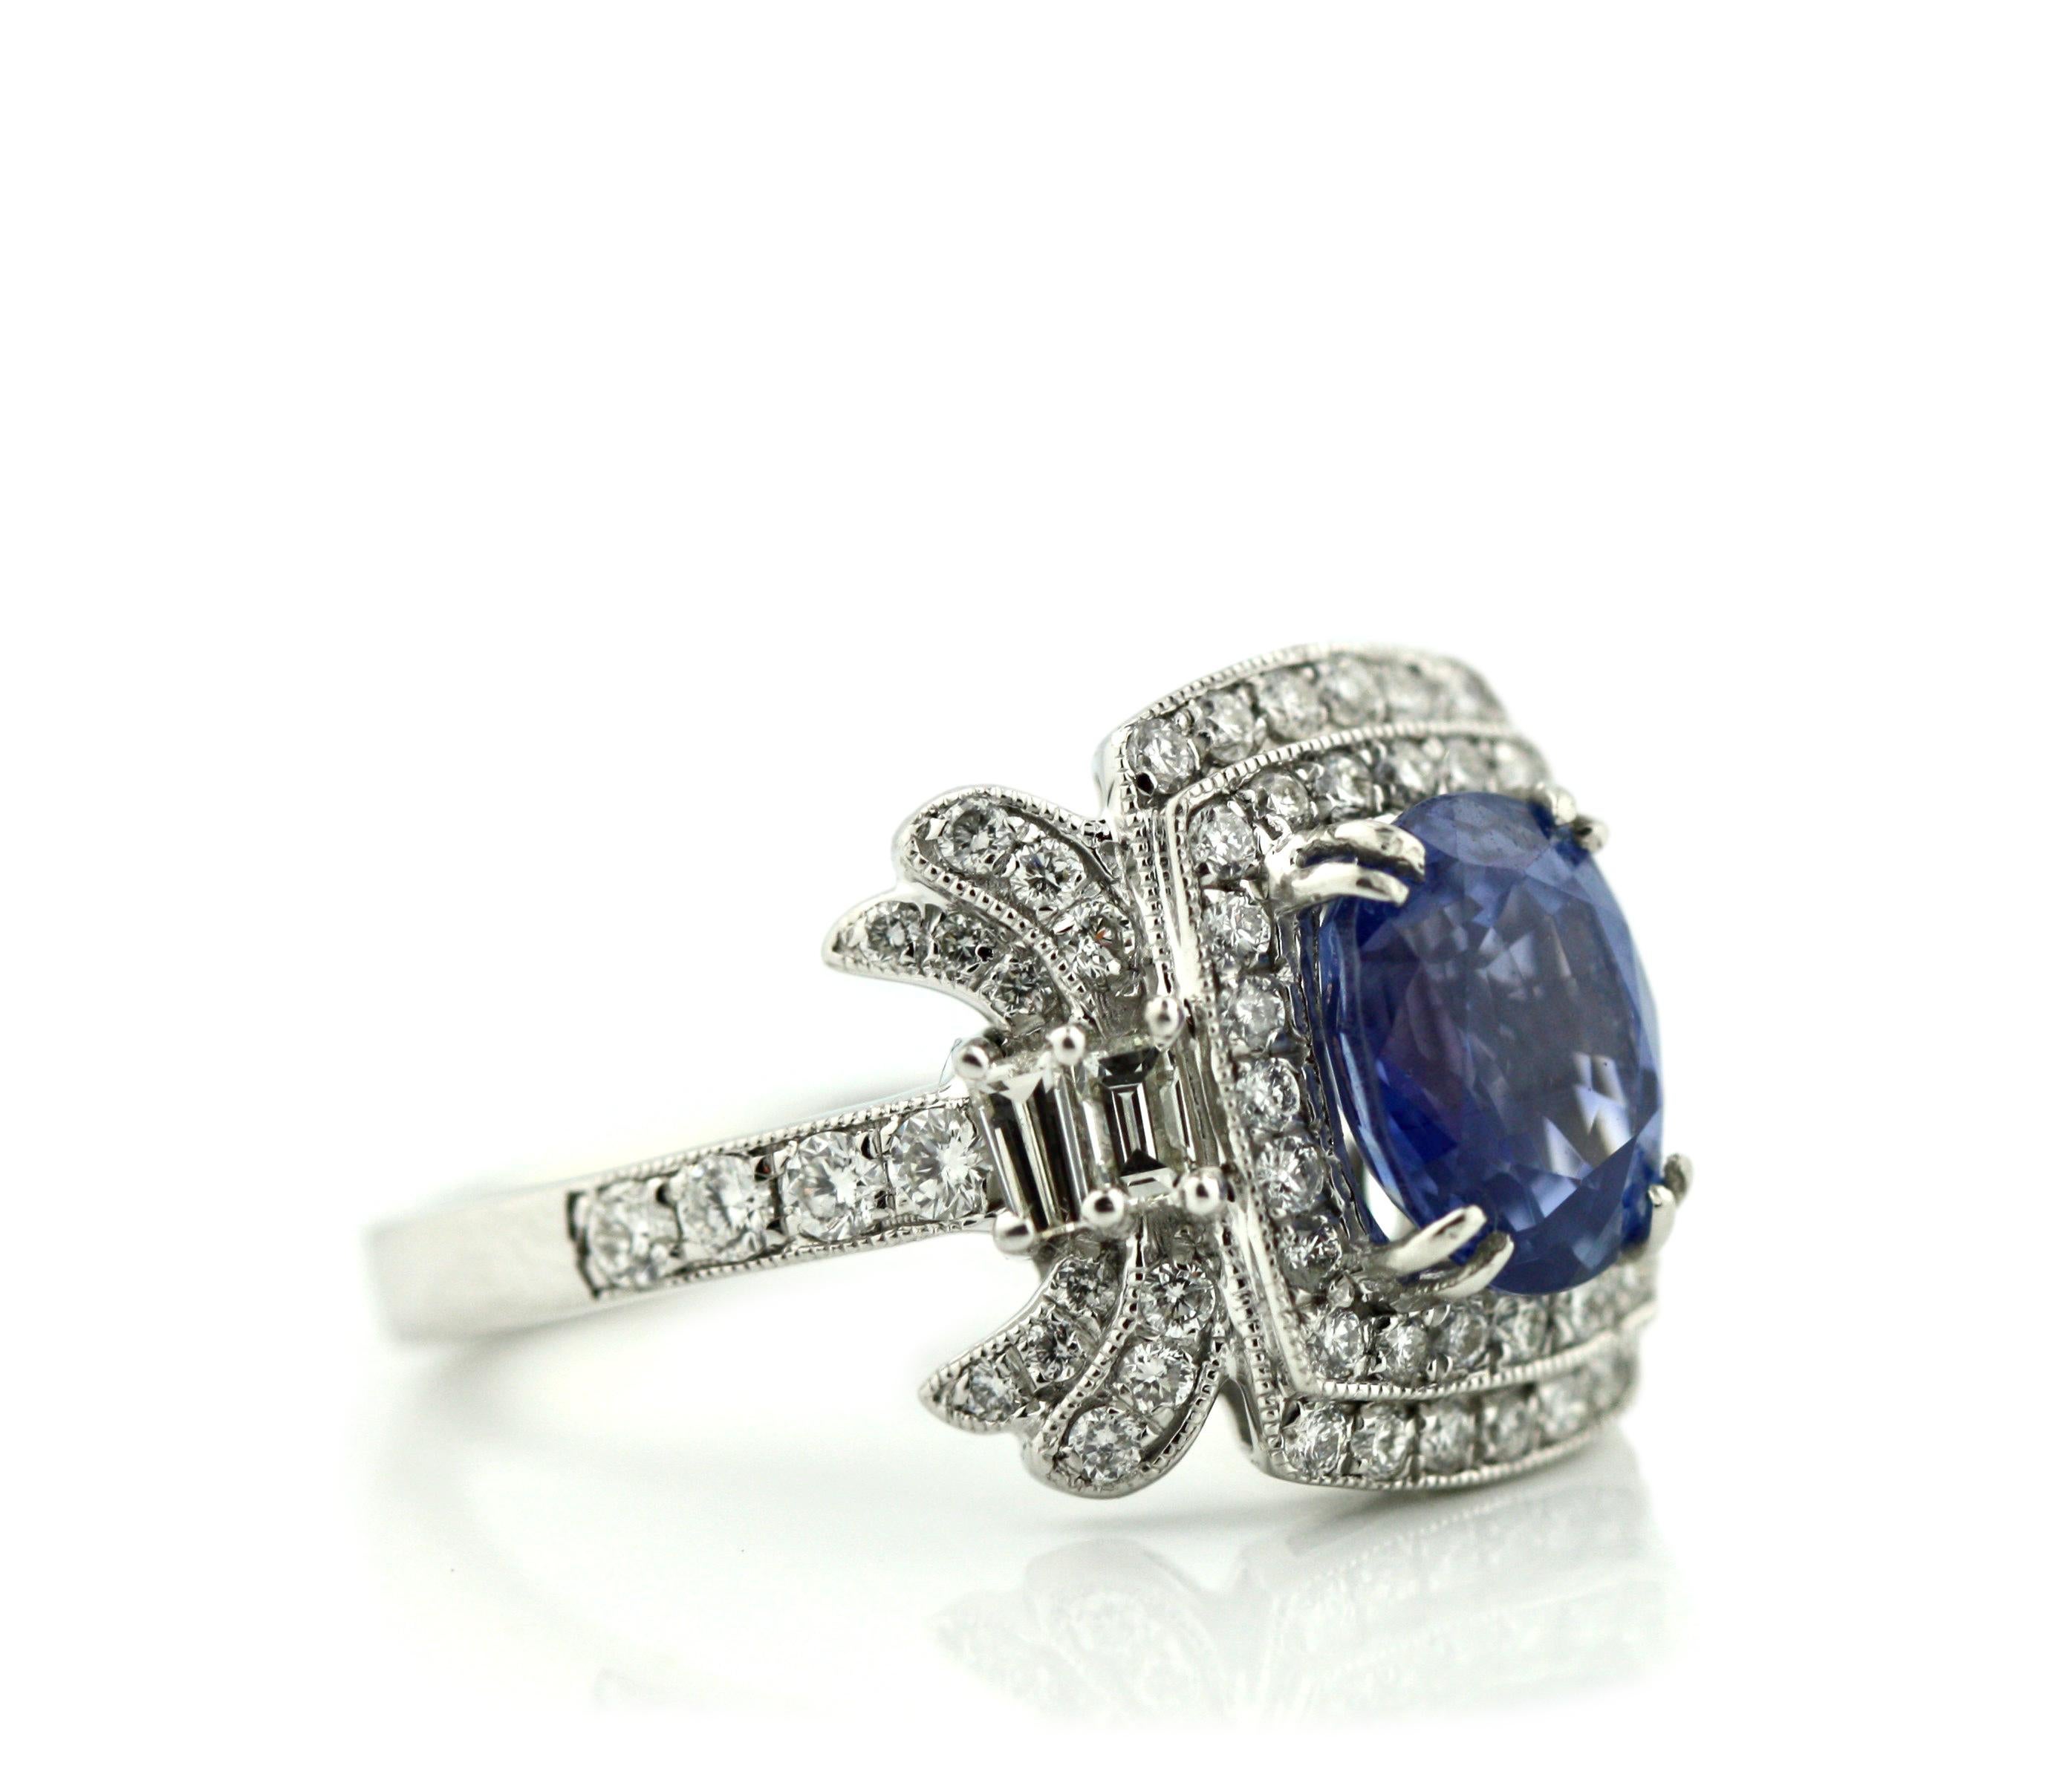 Platinum, Sapphire and Diamond Ring
Sapphire weighing approximately 2.61 carats
Diamonds weighing approximately 0.90 carats
size 7 1/2